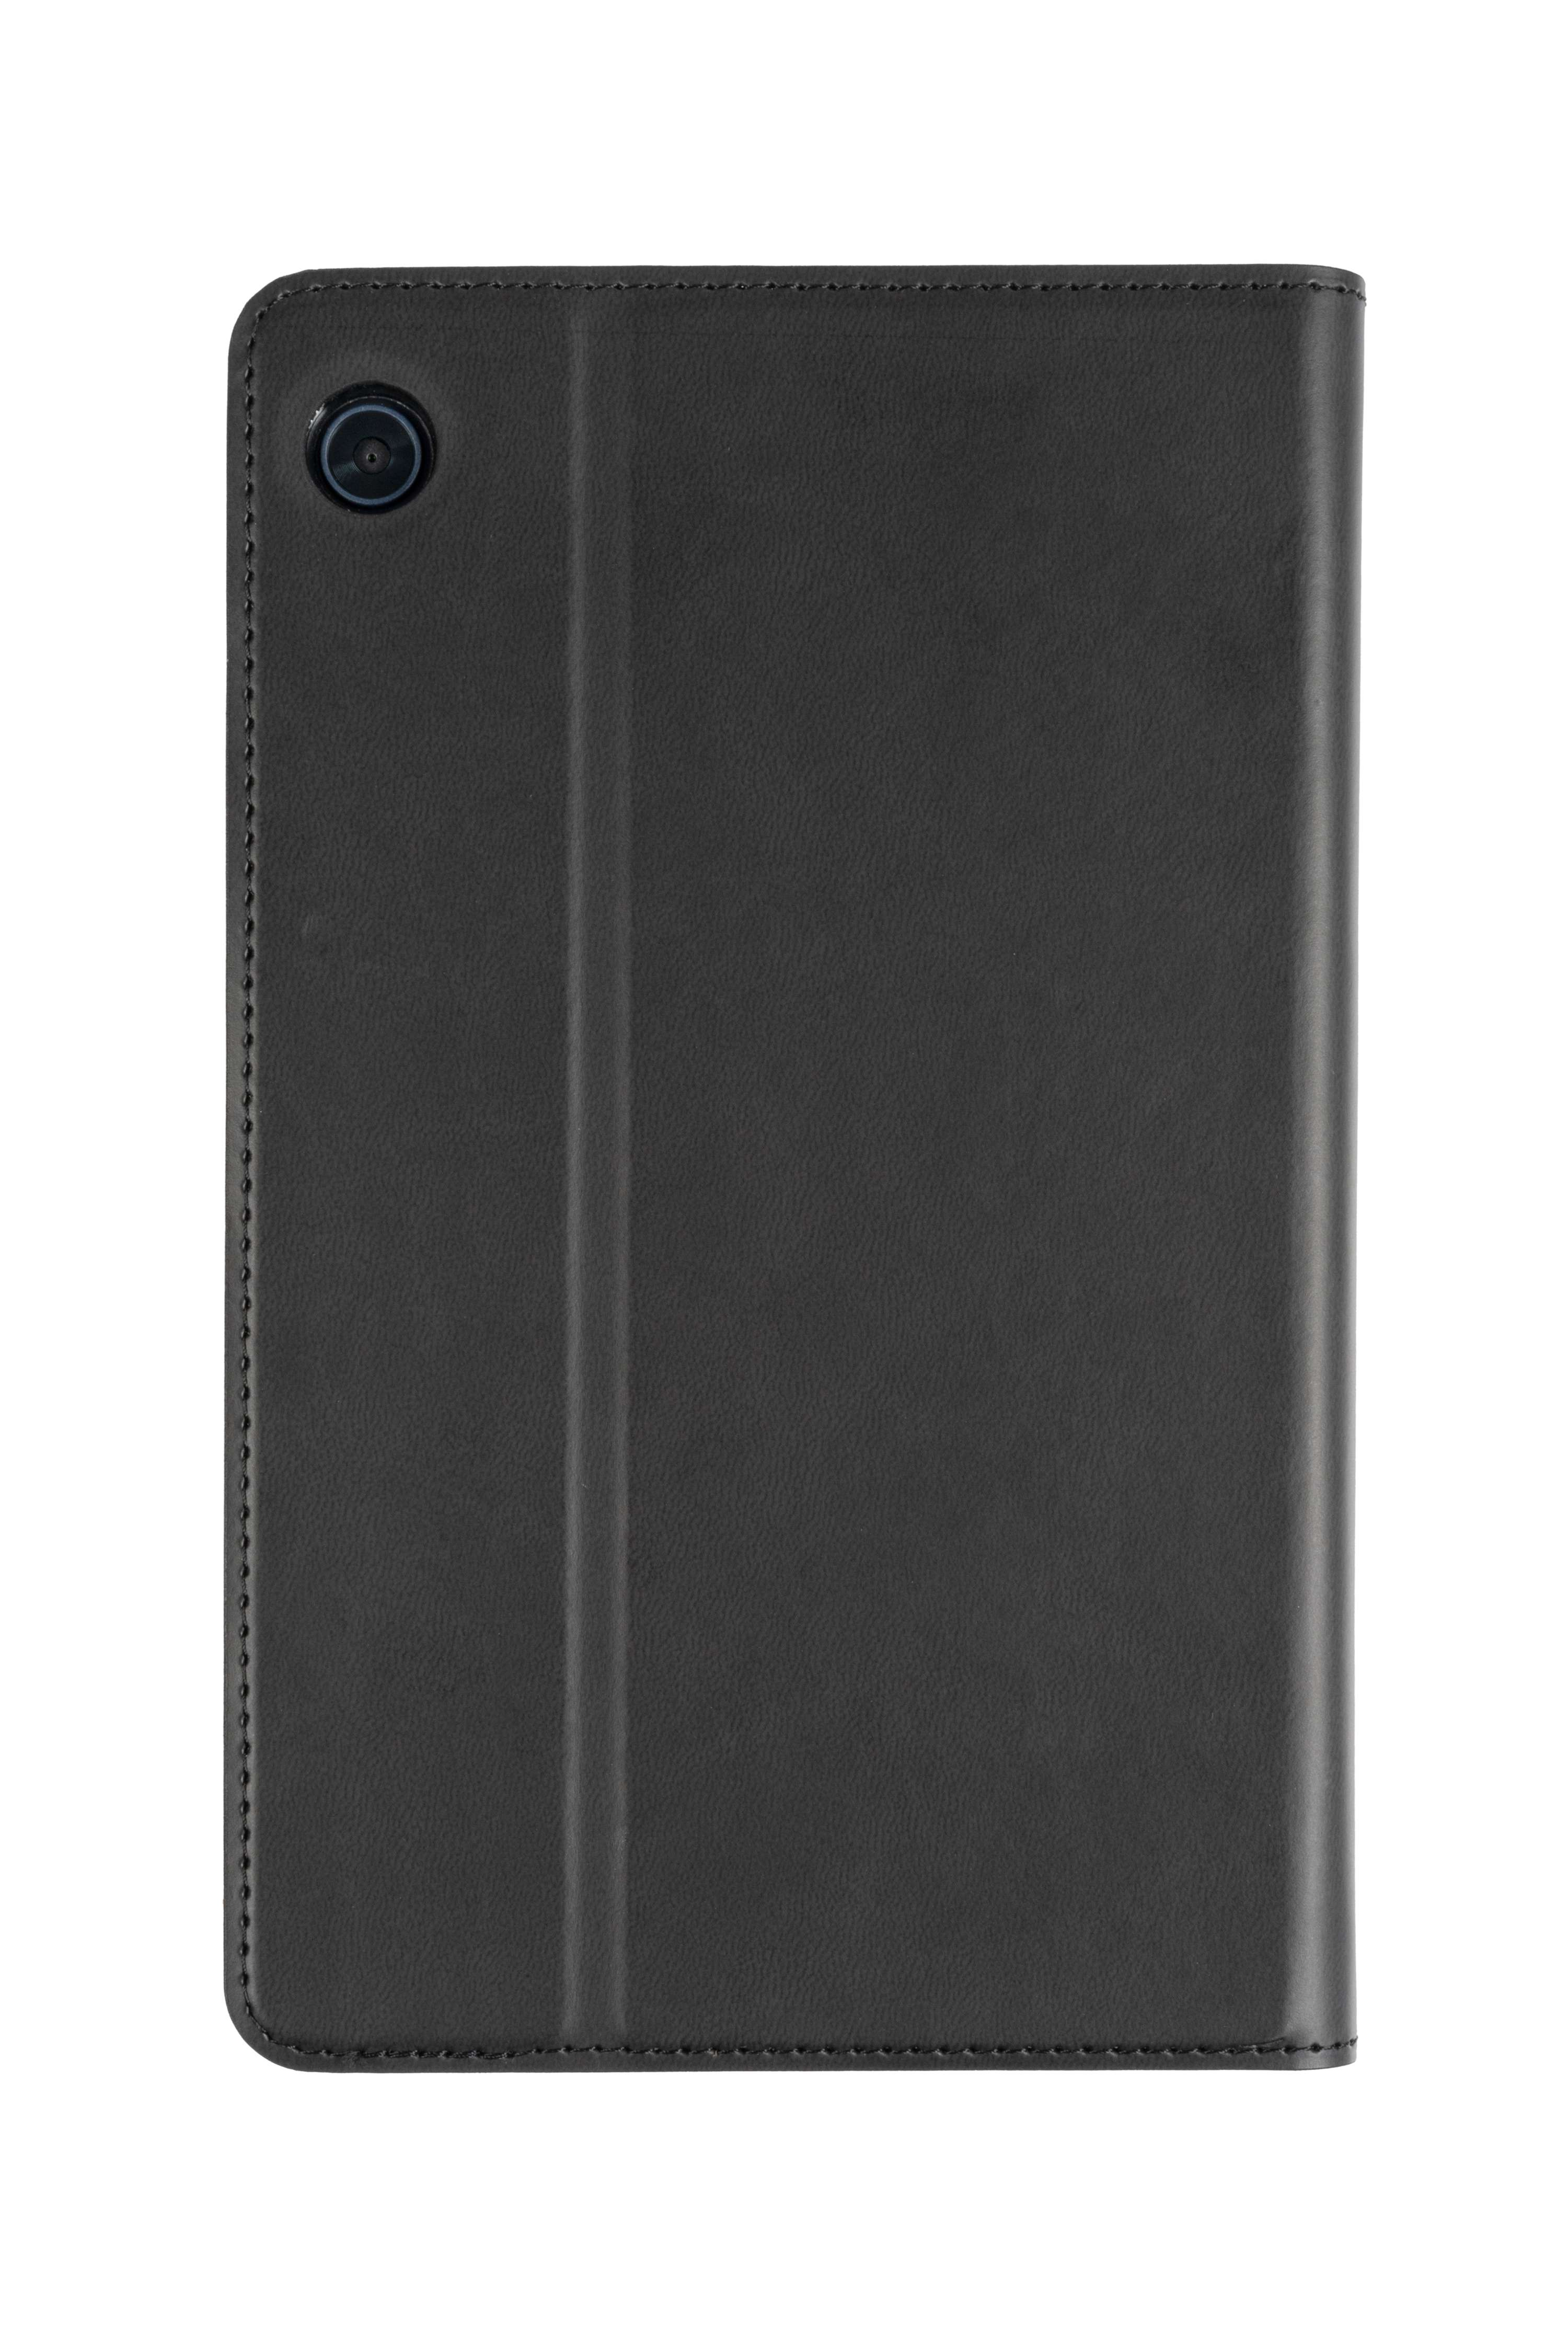 für Bookcover Cover 2.0 Leather, Tablet Easy-Click Schwarz COVERS GECKO Hülle PU Huawei